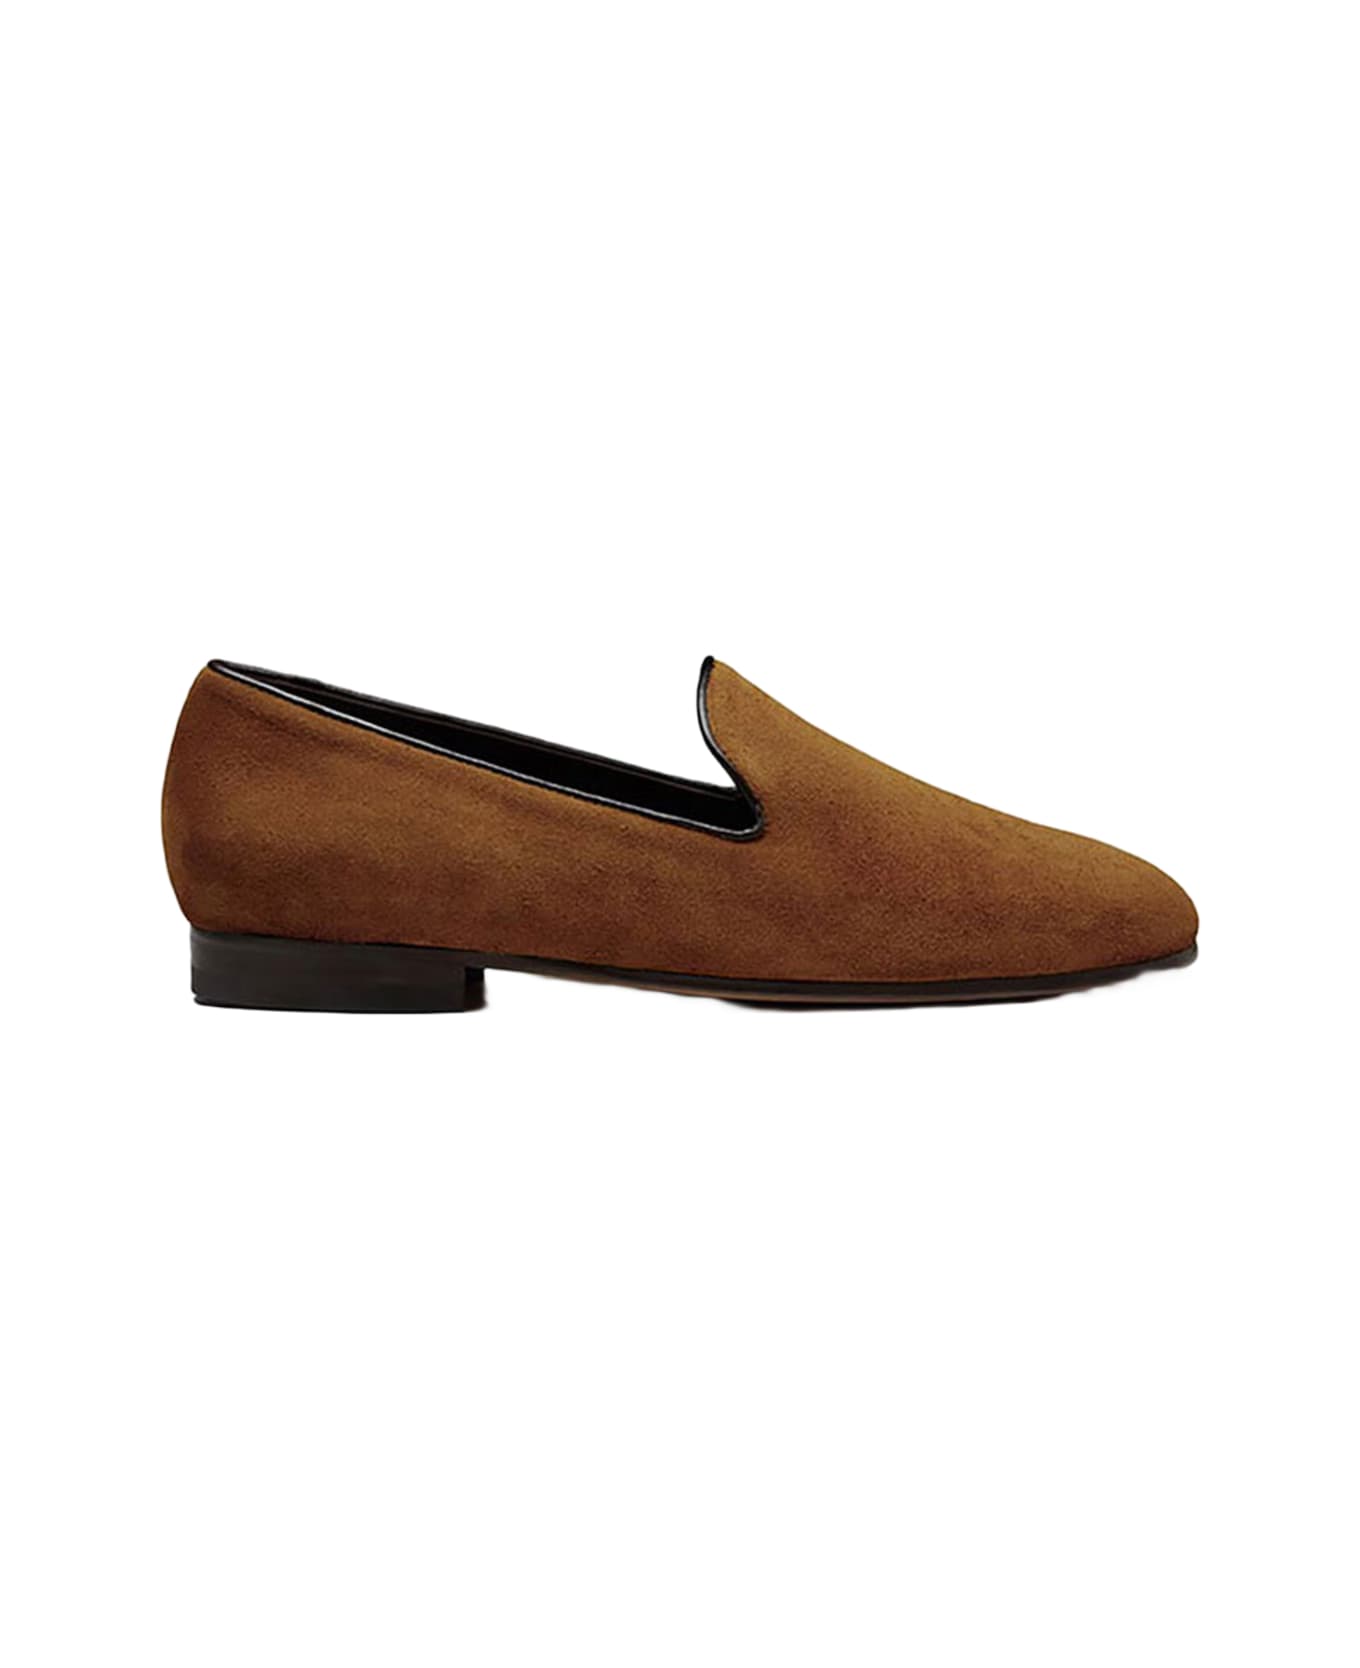 CB Made in Italy Suede Flats Positano - Tobacco